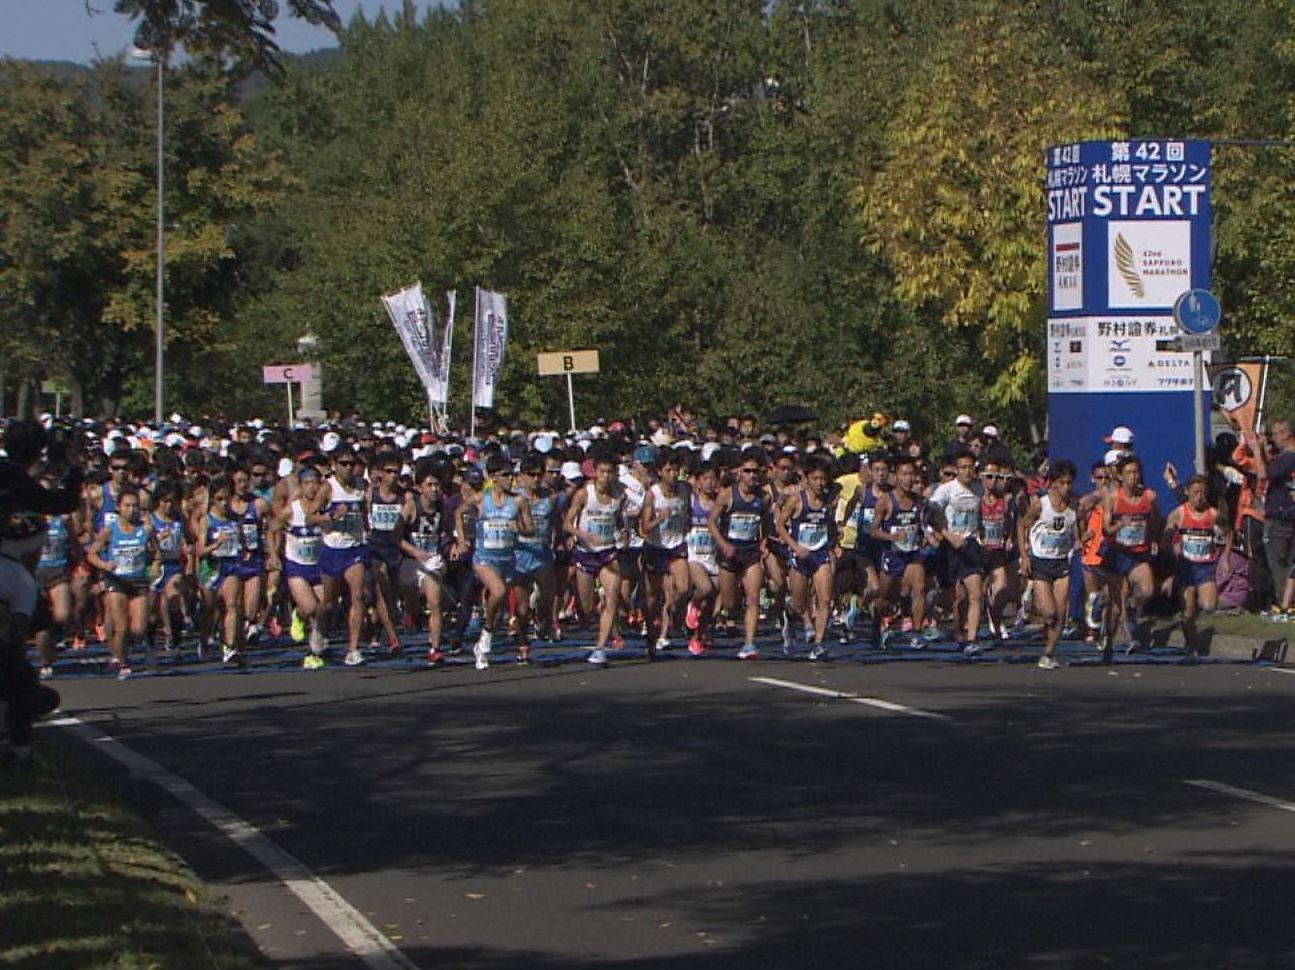 Delivering The Appearance Of Runners From The Start Finish Point Live Broadcasting Of The 43rd Sapporo Marathon On October 7 Sun J Com Channel Sapporo Live Distribution By Youtube And The